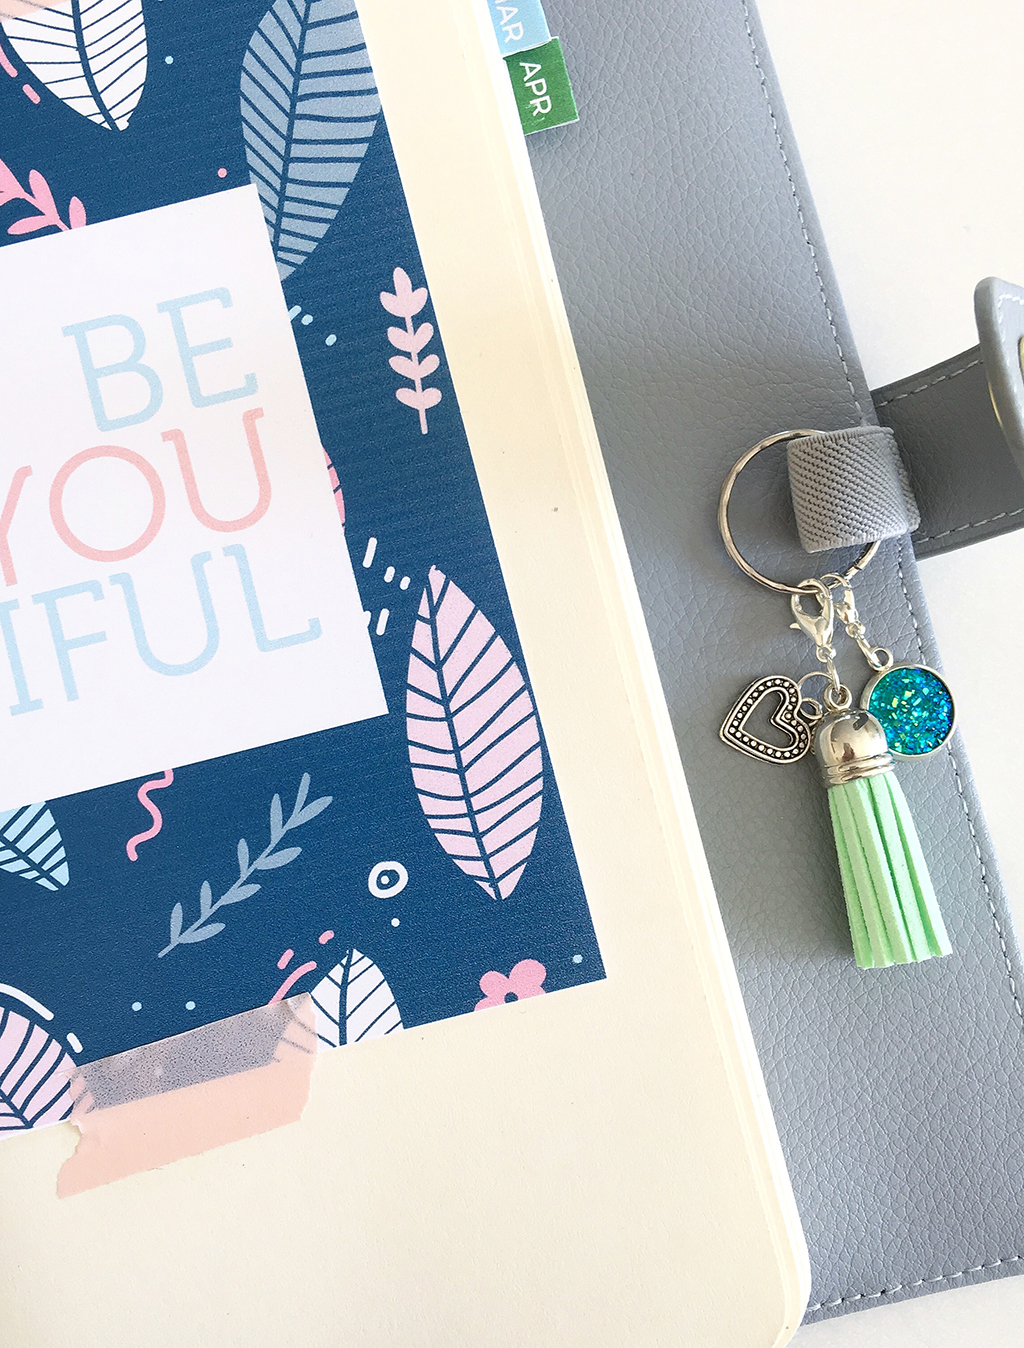 Add a planner charm keyring to your pen loop